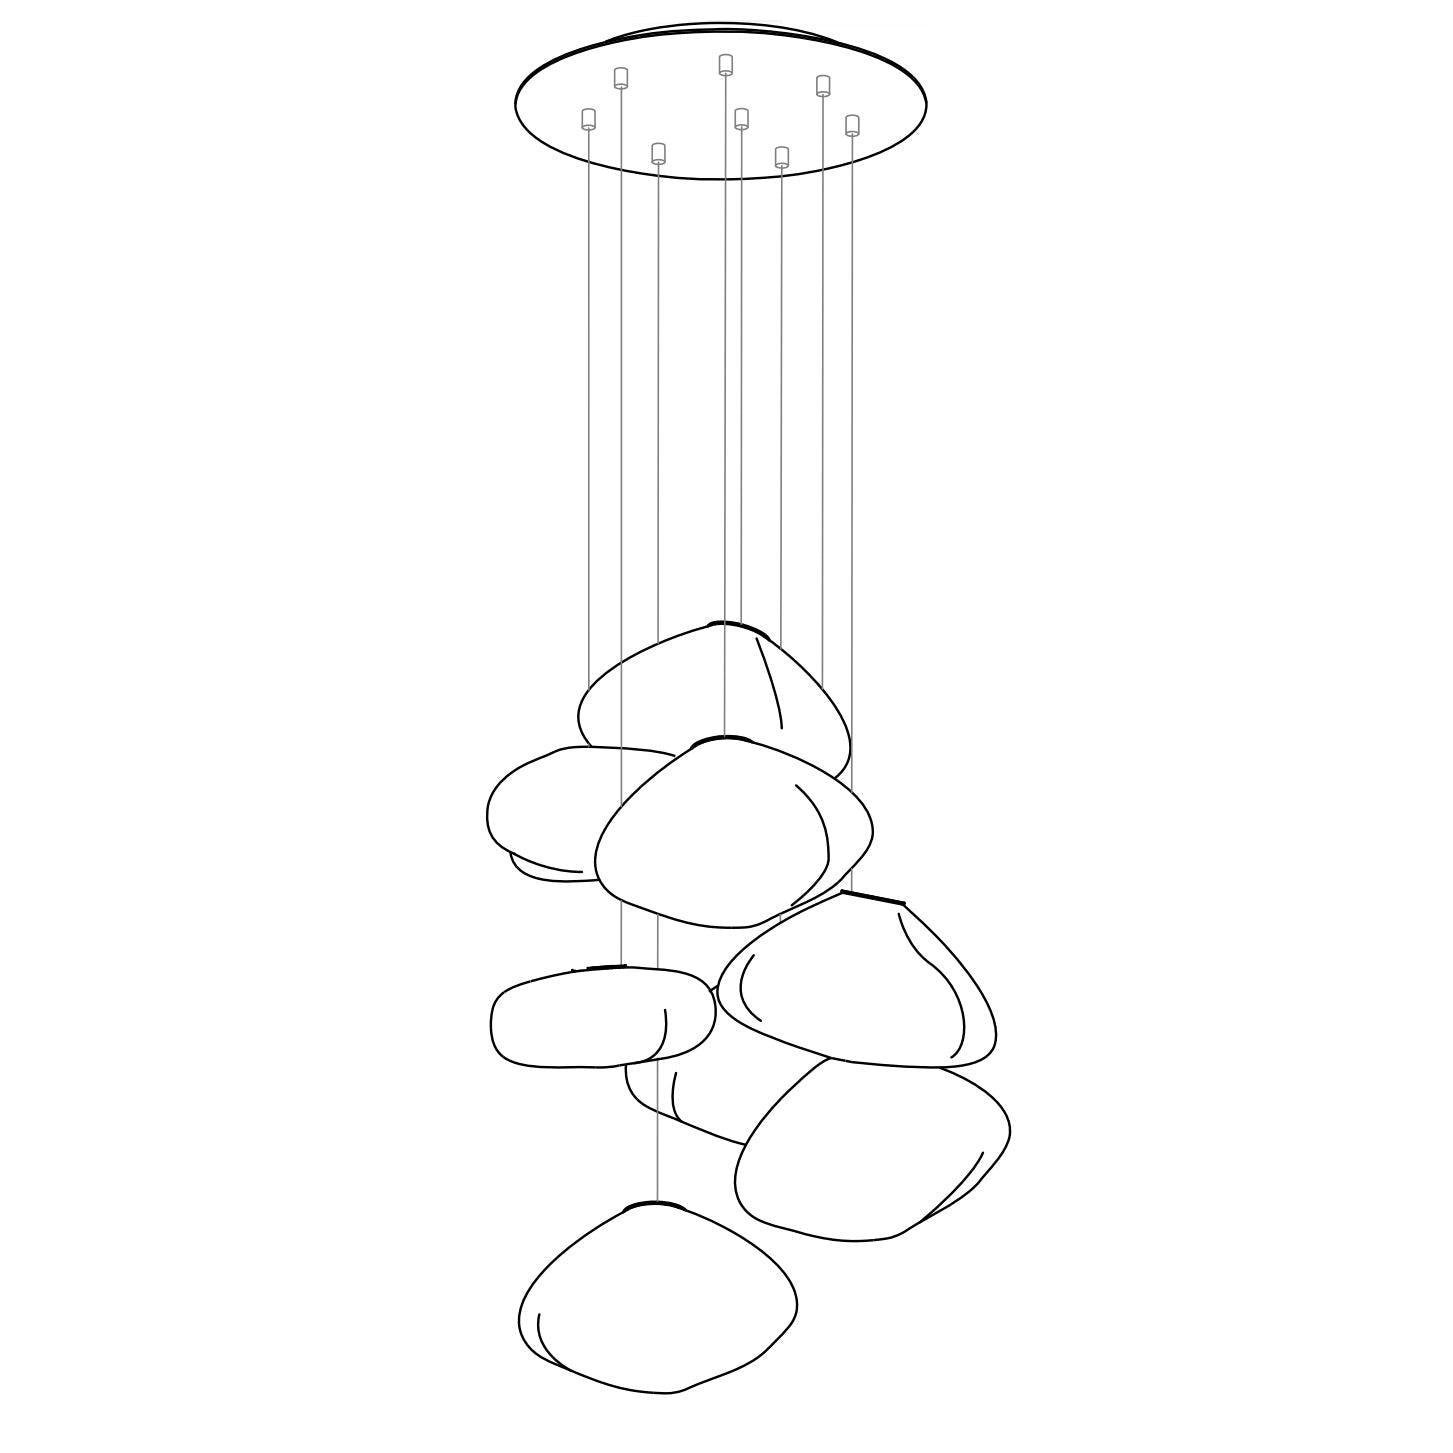 8-Headed Random Pendant Light with a Total of 73 Heads, Featuring a 30cm Diameter Round Canopy. Available in Smoke Grey Color Option.